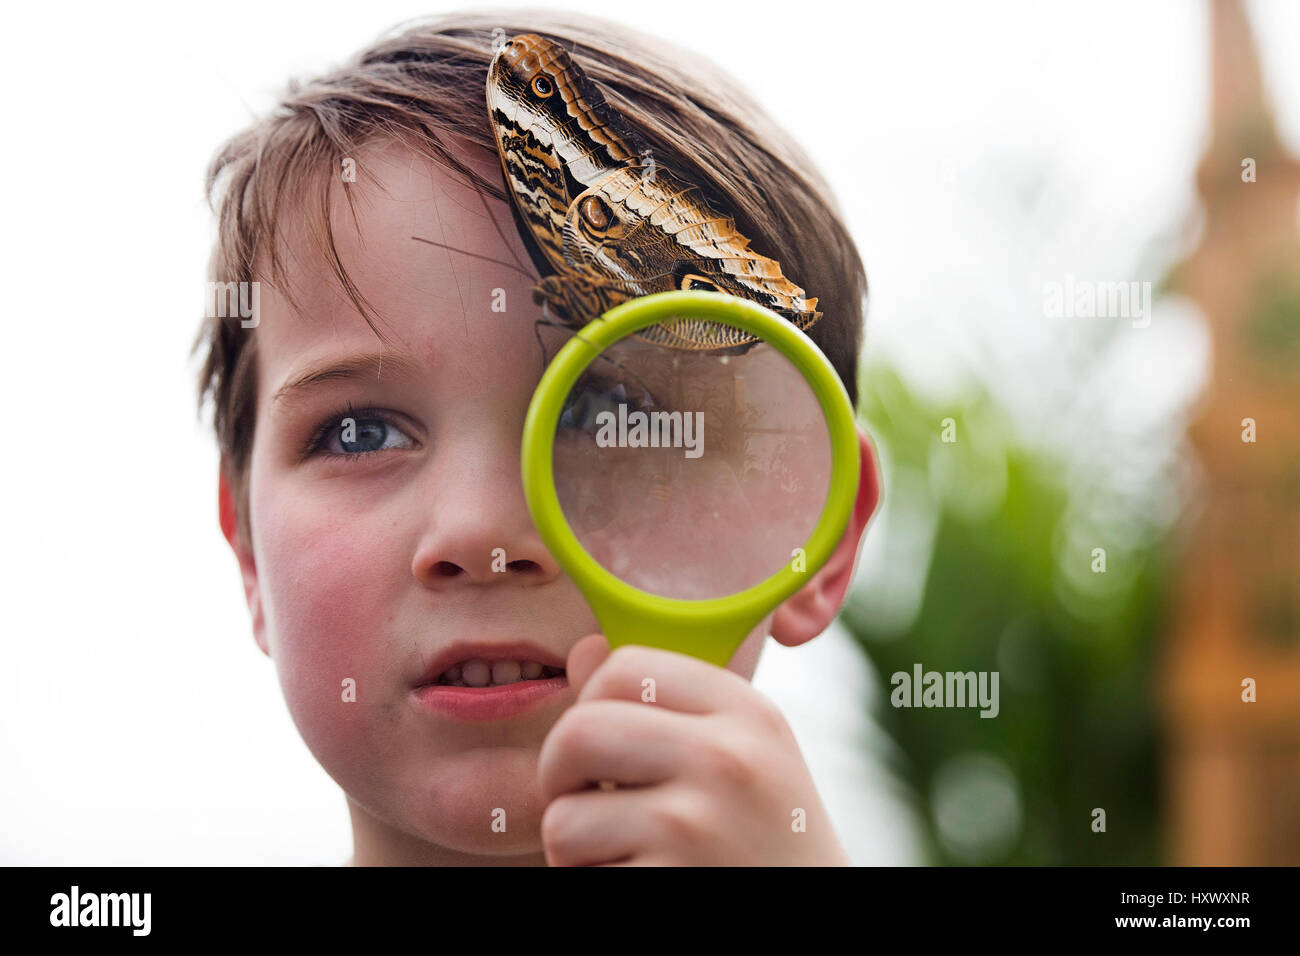 George Lewis, aged 5, poses with an Owl butterfly during a photocall to launch the Sensational Butterflies exhibition at the Natural History Museum in London. Stock Photo